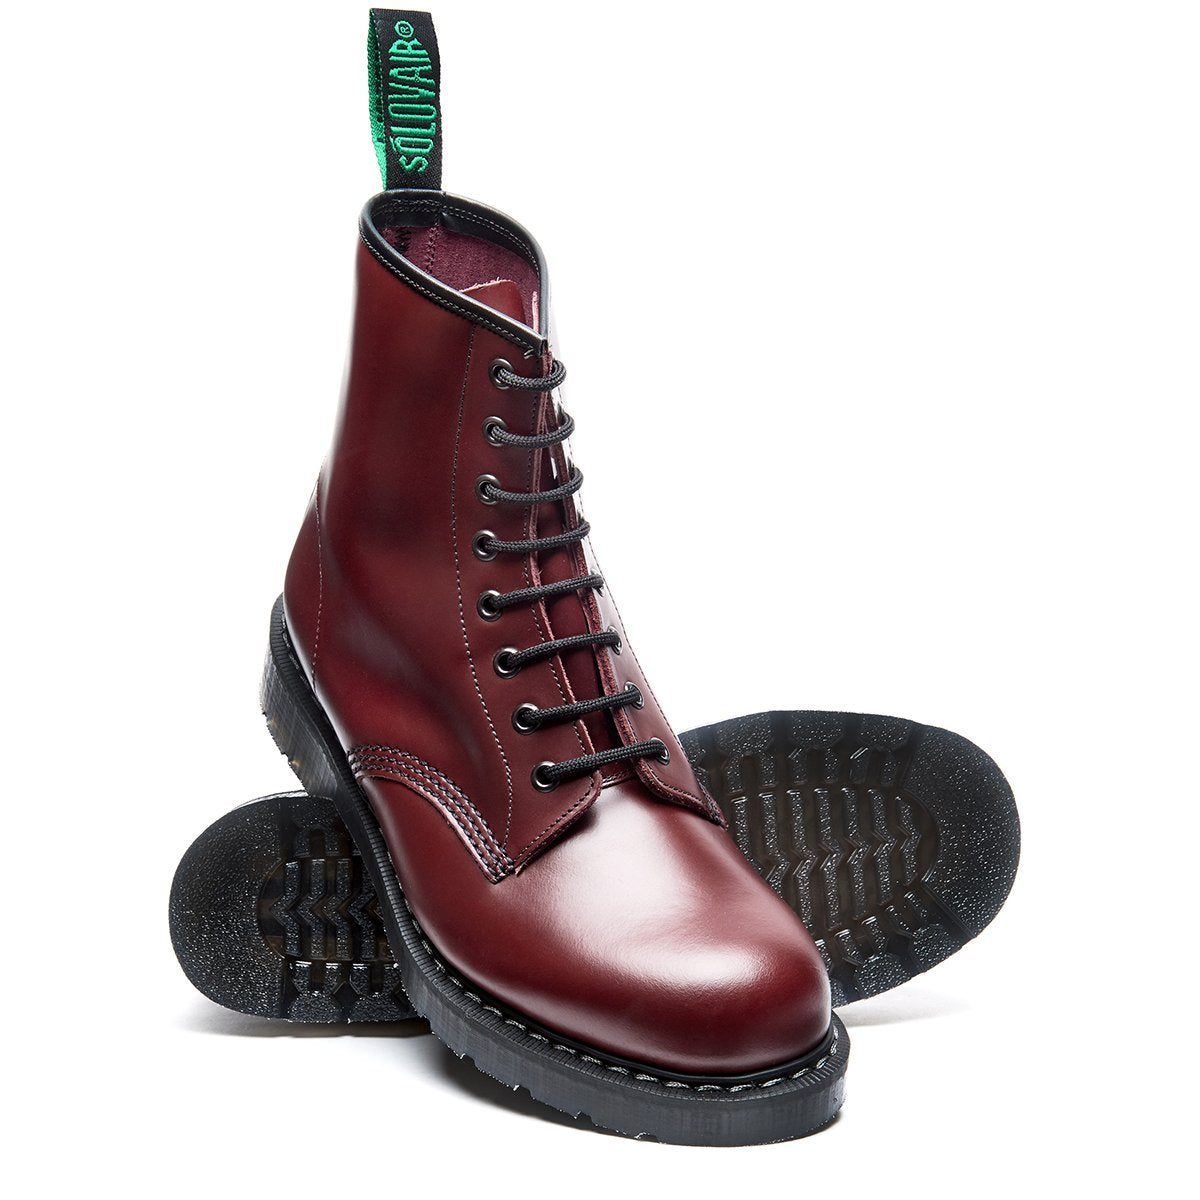 Solovair 8 Eye Derby Boot S8-551-OX-G Unisex Oxblood Hi-Shine Leather Lace Up Ankle Boots